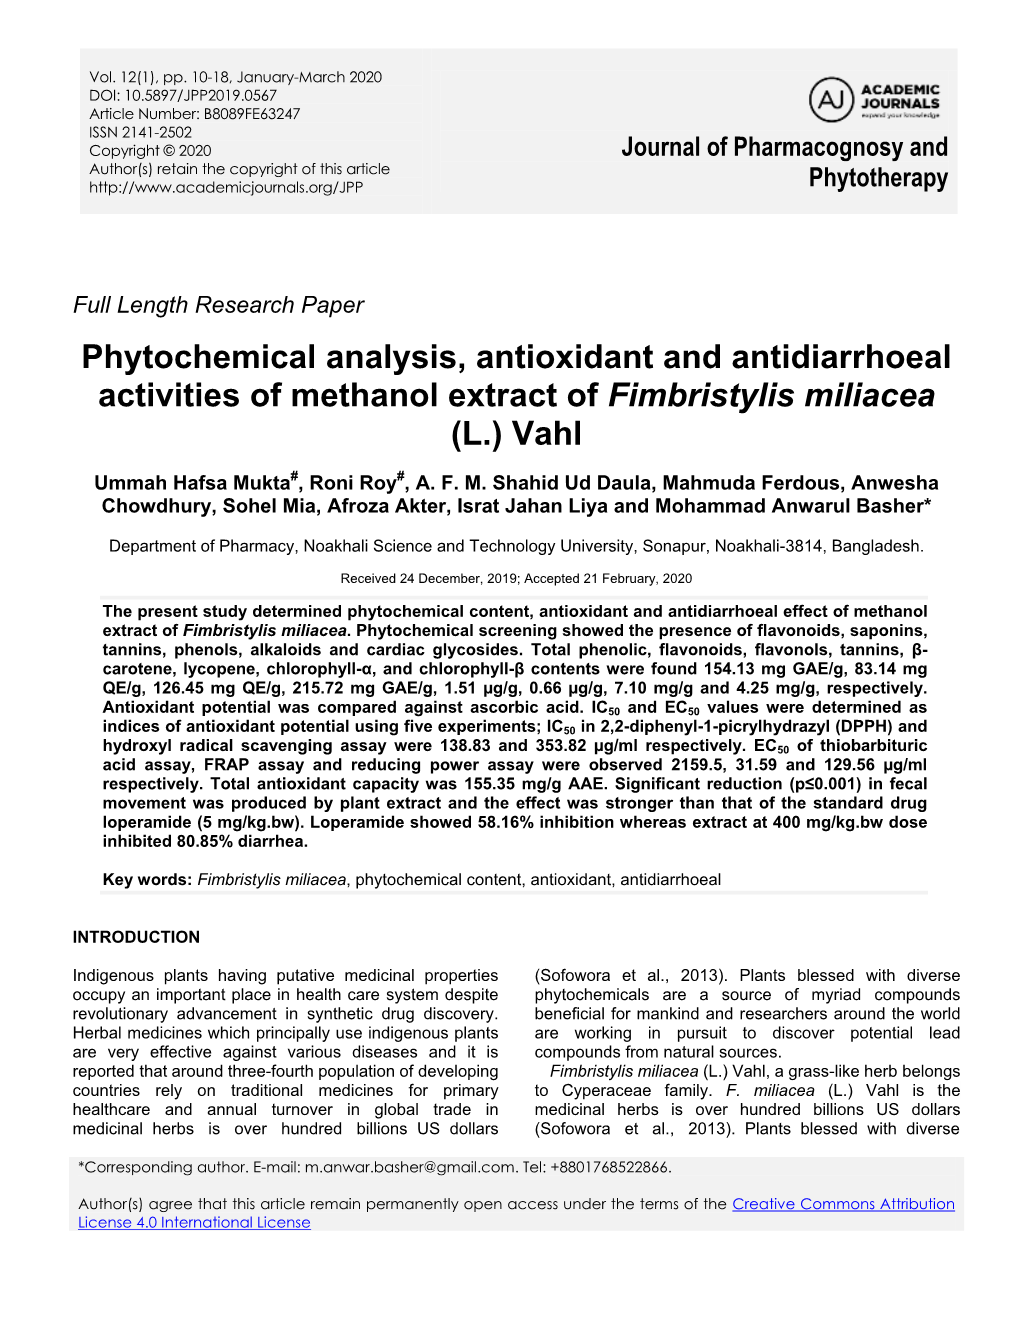 Phytochemical Analysis, Antioxidant and Antidiarrhoeal Activities of Methanol Extract of Fimbristylis Miliacea (L.) Vahl